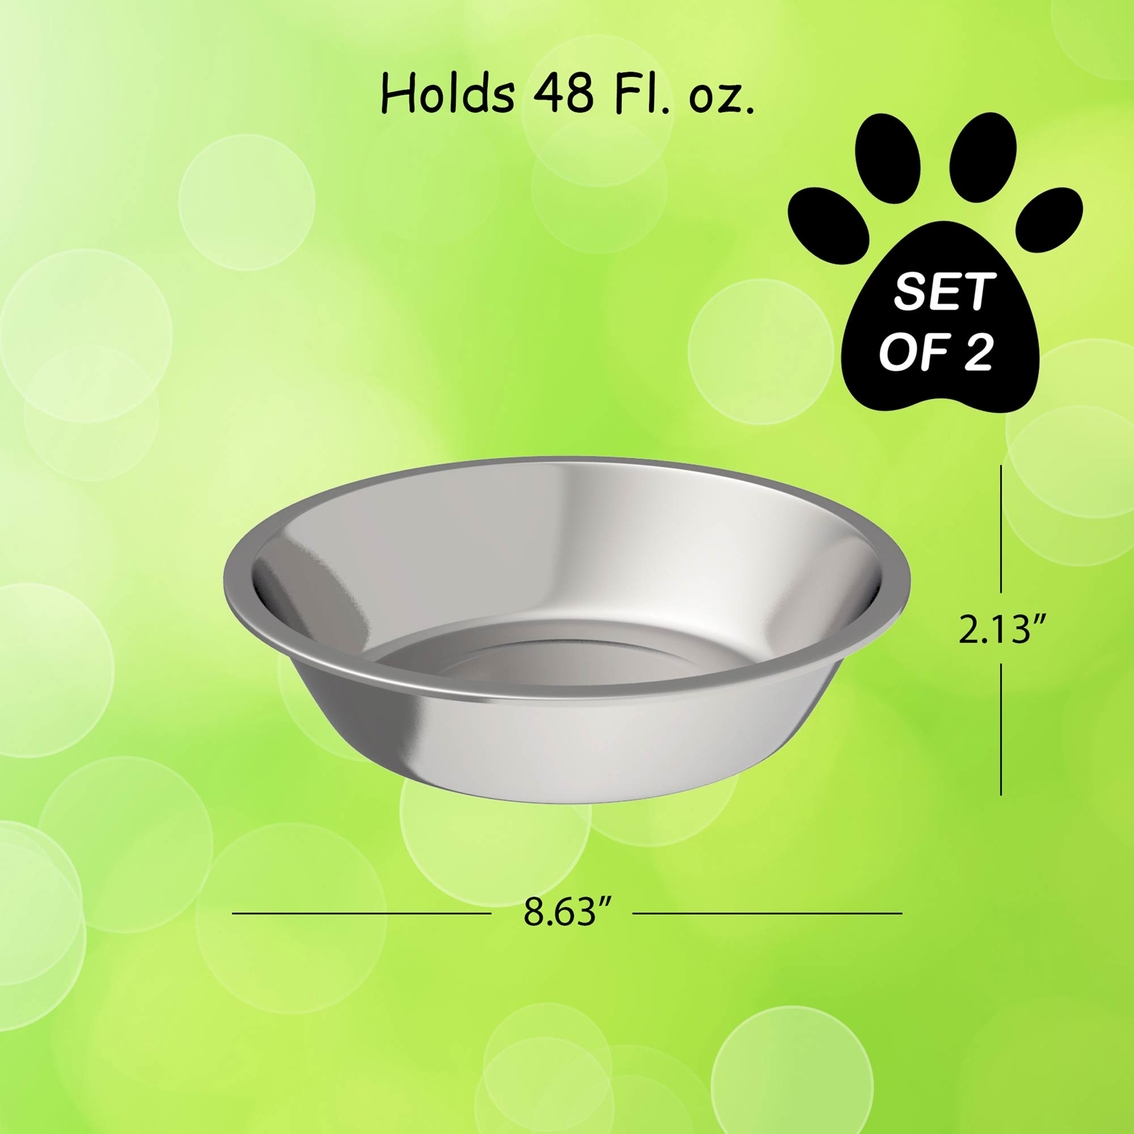 Petmaker Stainless Steel Hanging Pet Bowls Set of 2 - Image 3 of 8